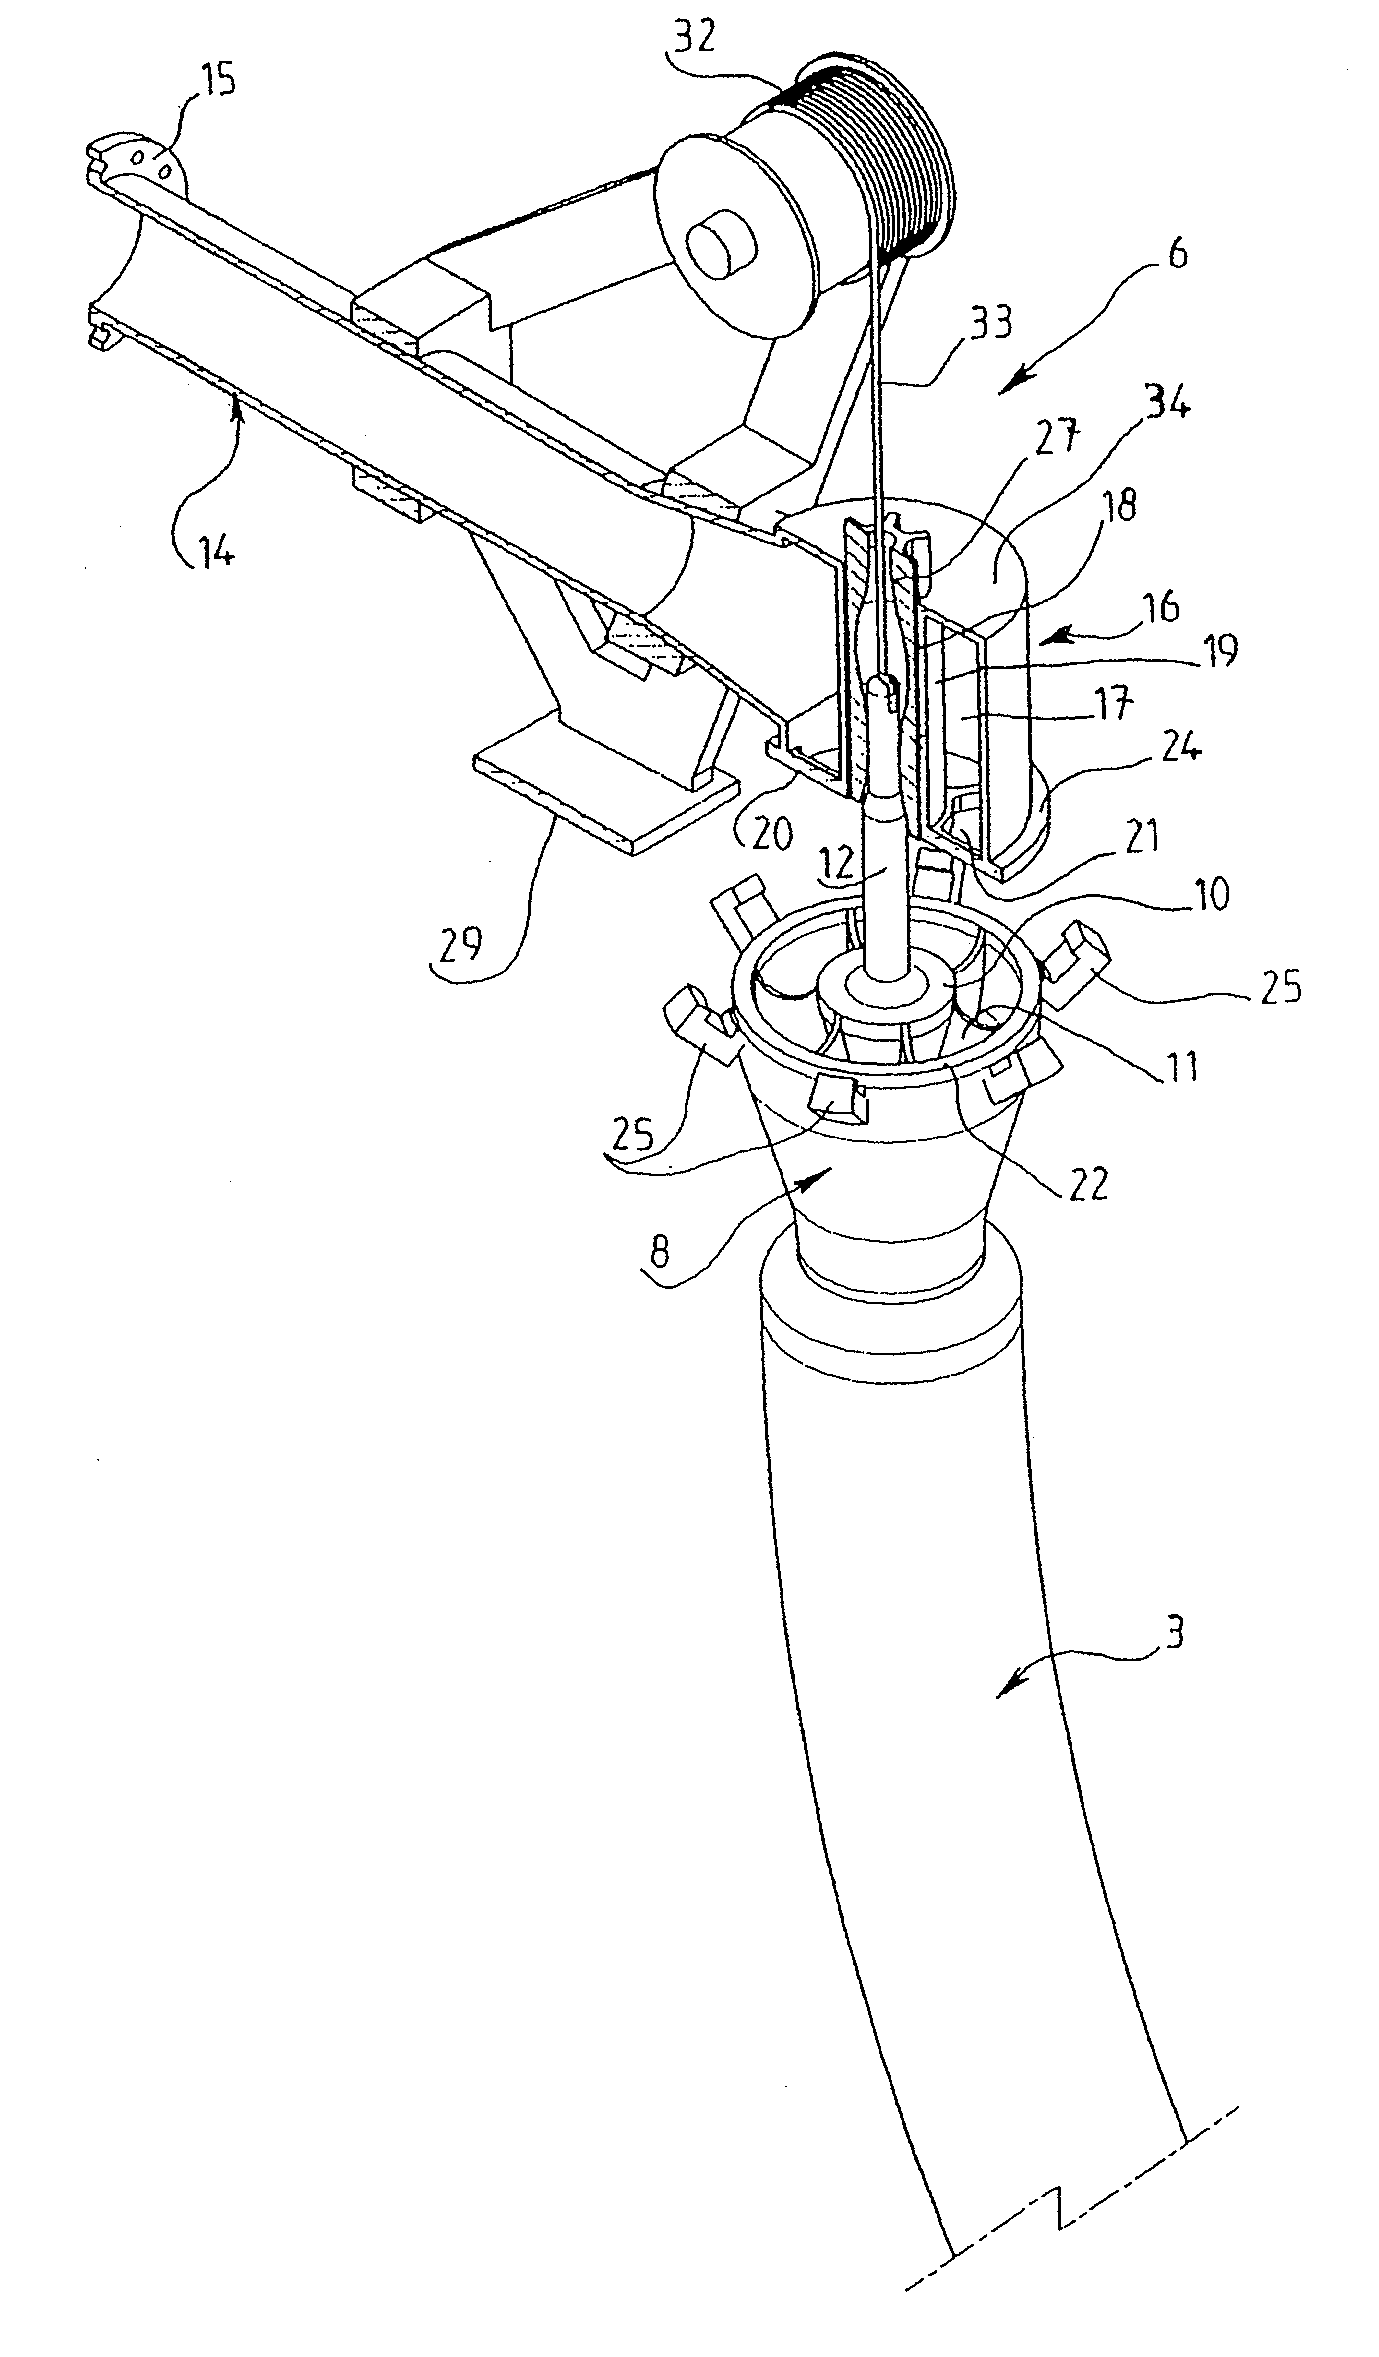 Device for connecting the end of a flexible liquid supply pipe to a fixed tubing such as the manifold on a ship